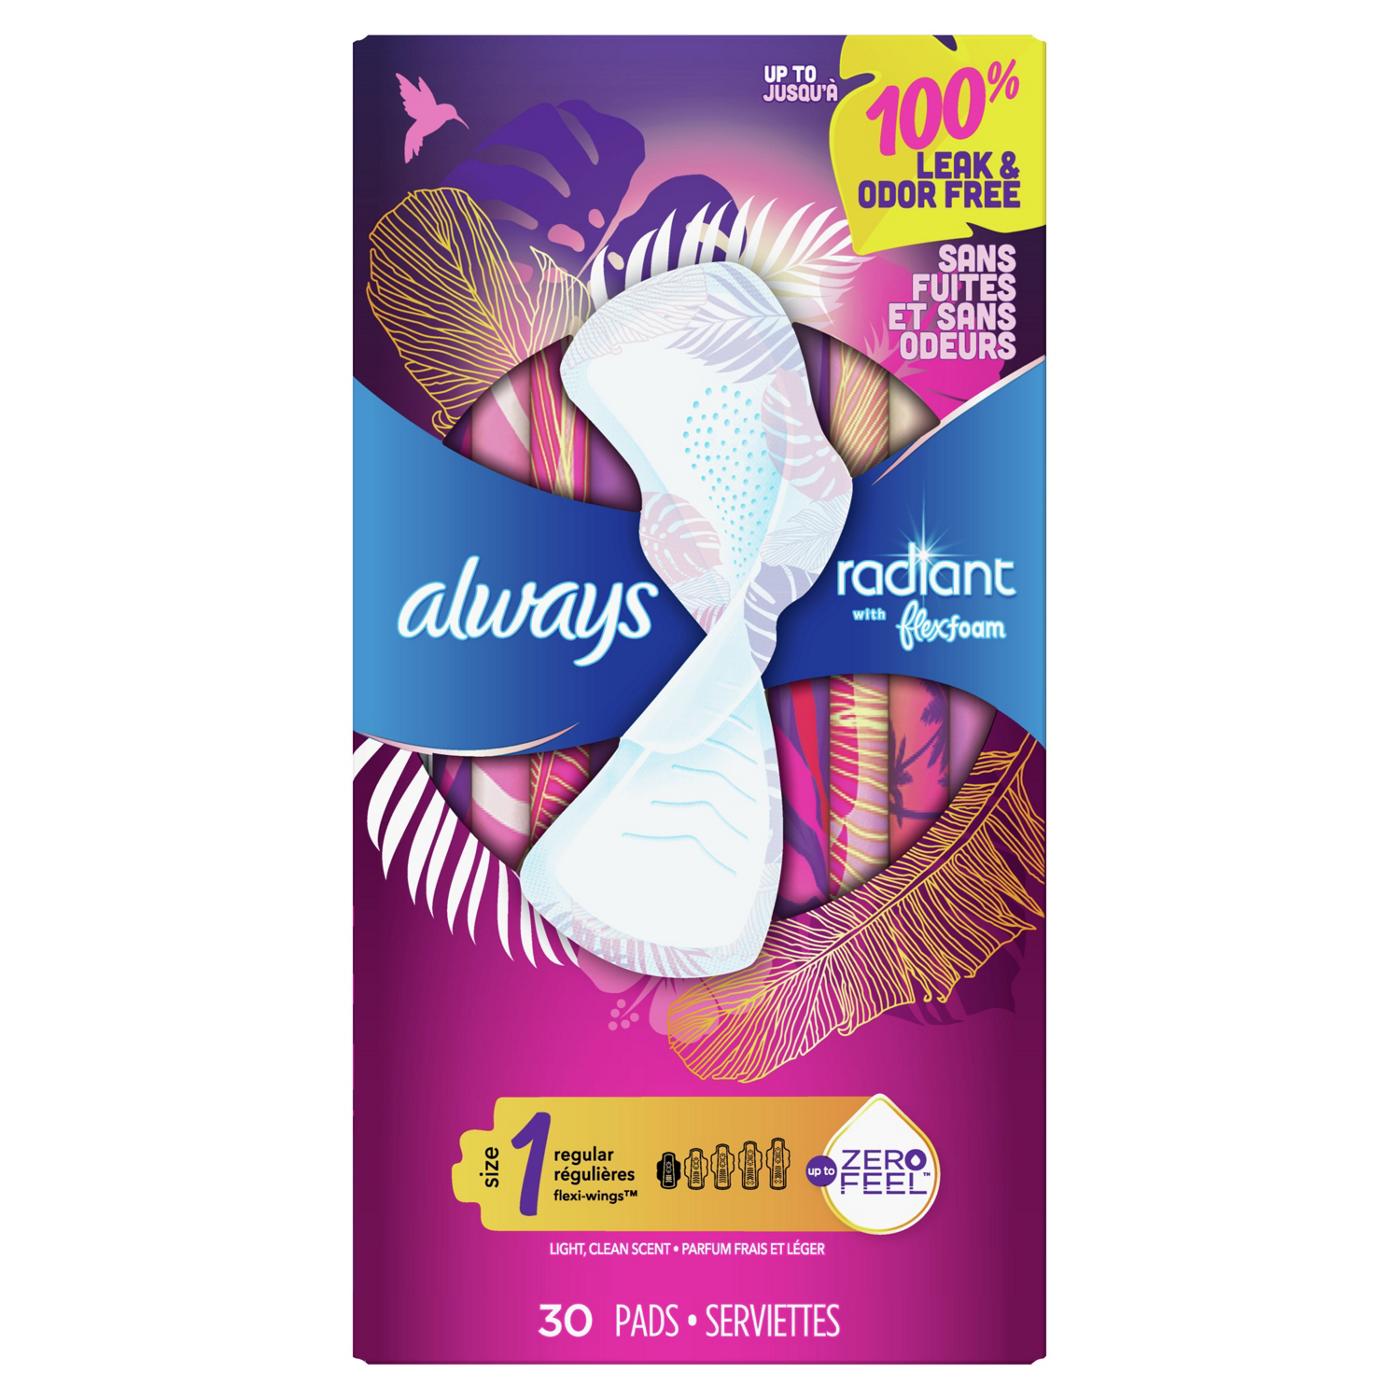 Always Radiant FlexFoam Pads Size 1, Regular with Wings; image 1 of 9